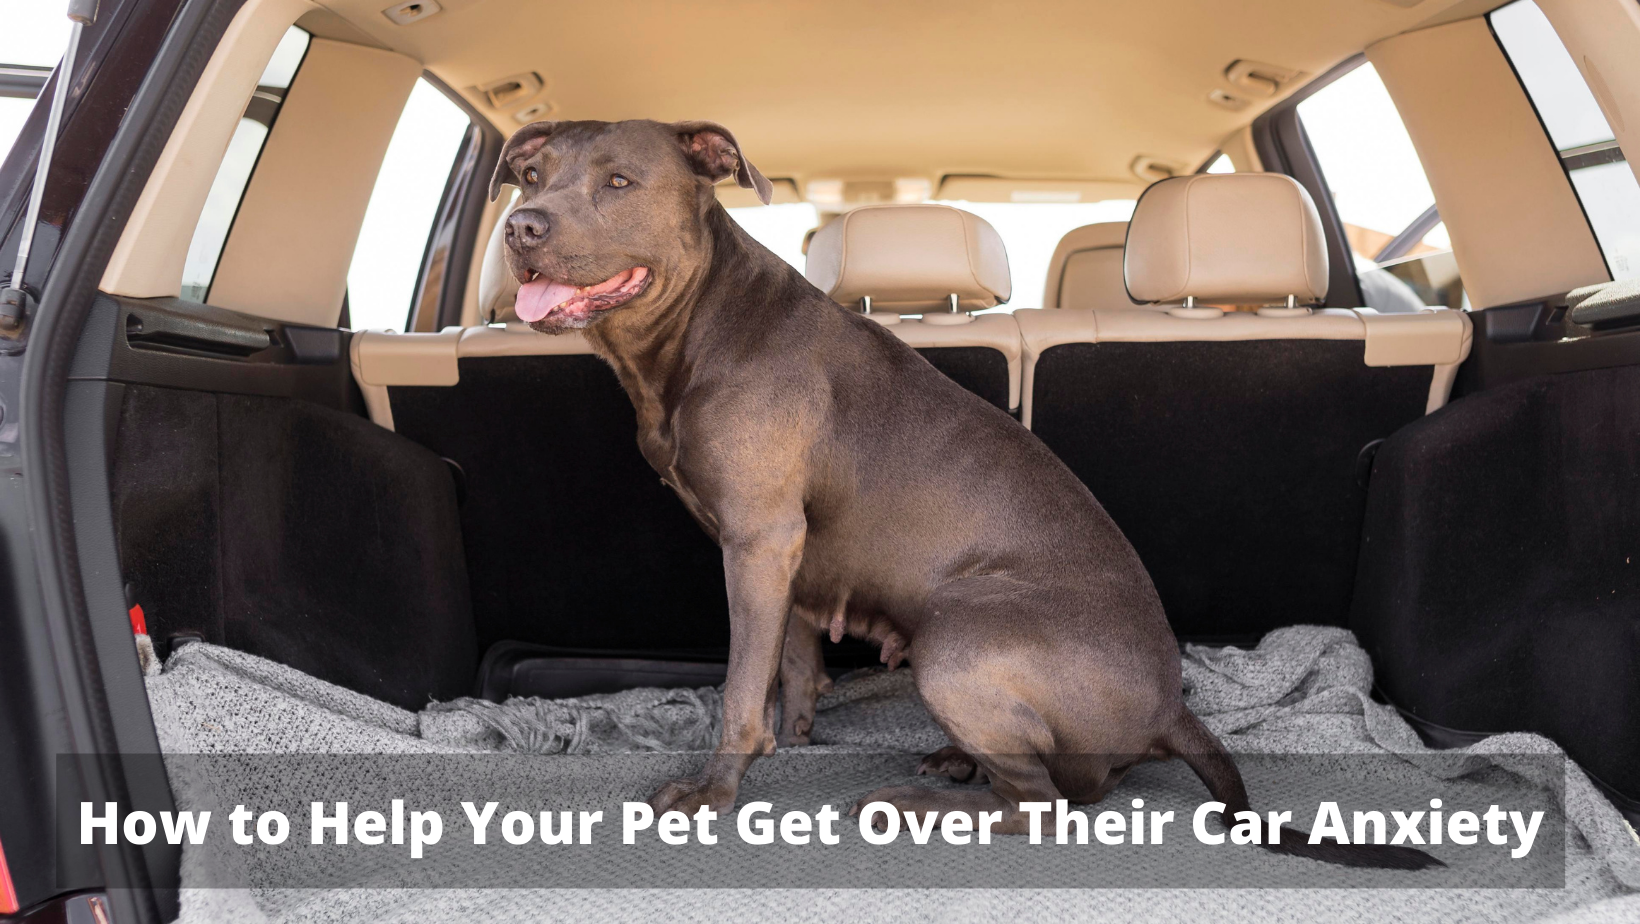 How to Help Your Pet Get Over Their Car Anxiety